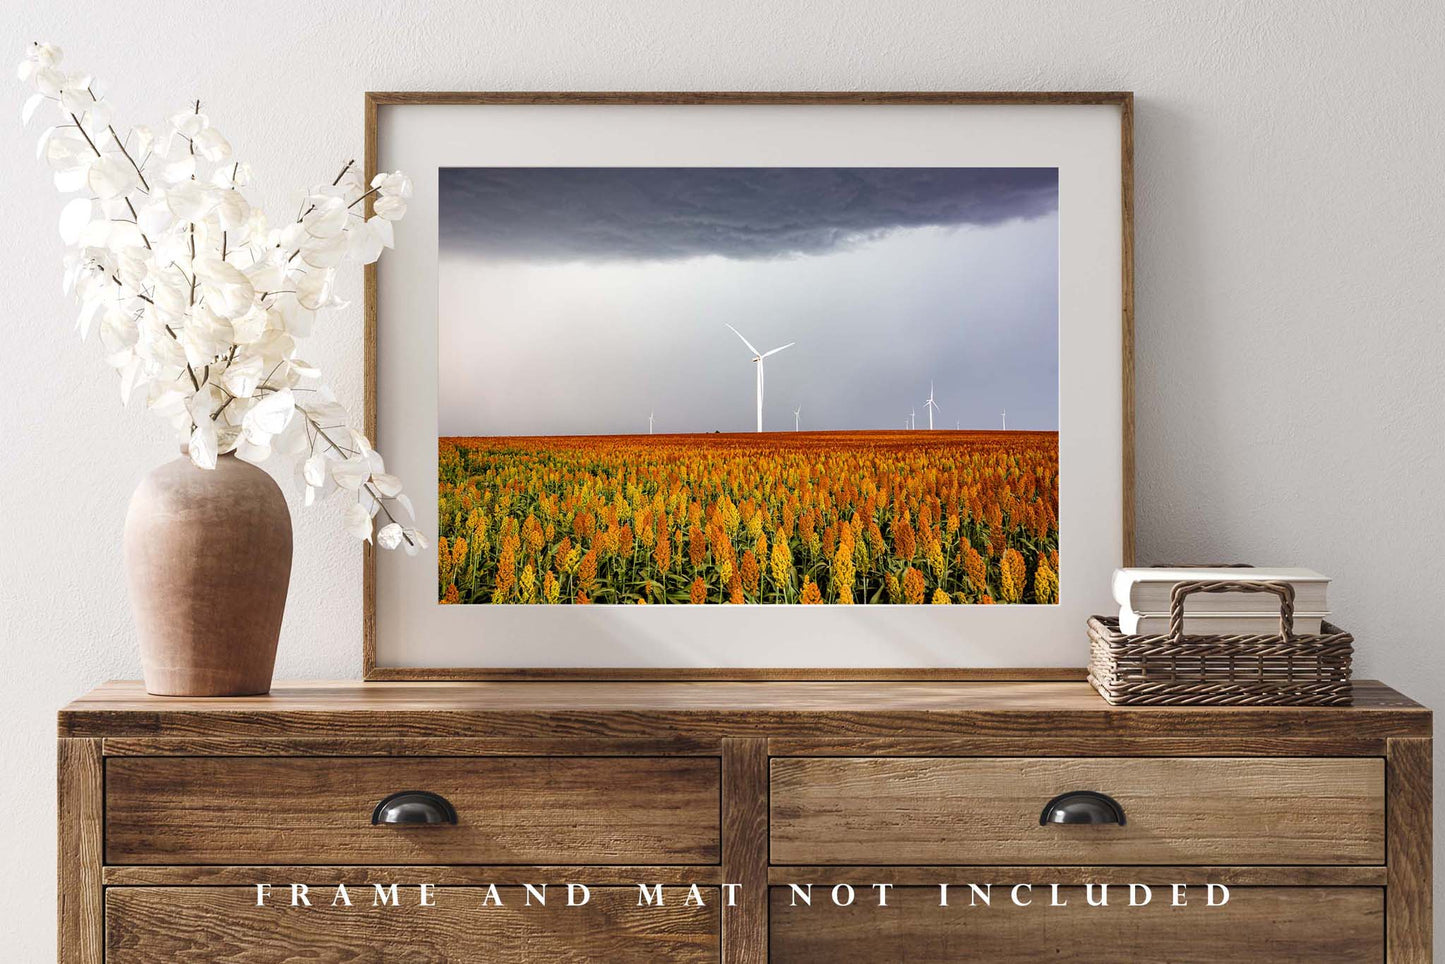 Country Photography Print - Picture of Colorful Maize Field and Wind Turbines on Autumn Day in Kansas - Farmhouse Home Decor Photo Artwork